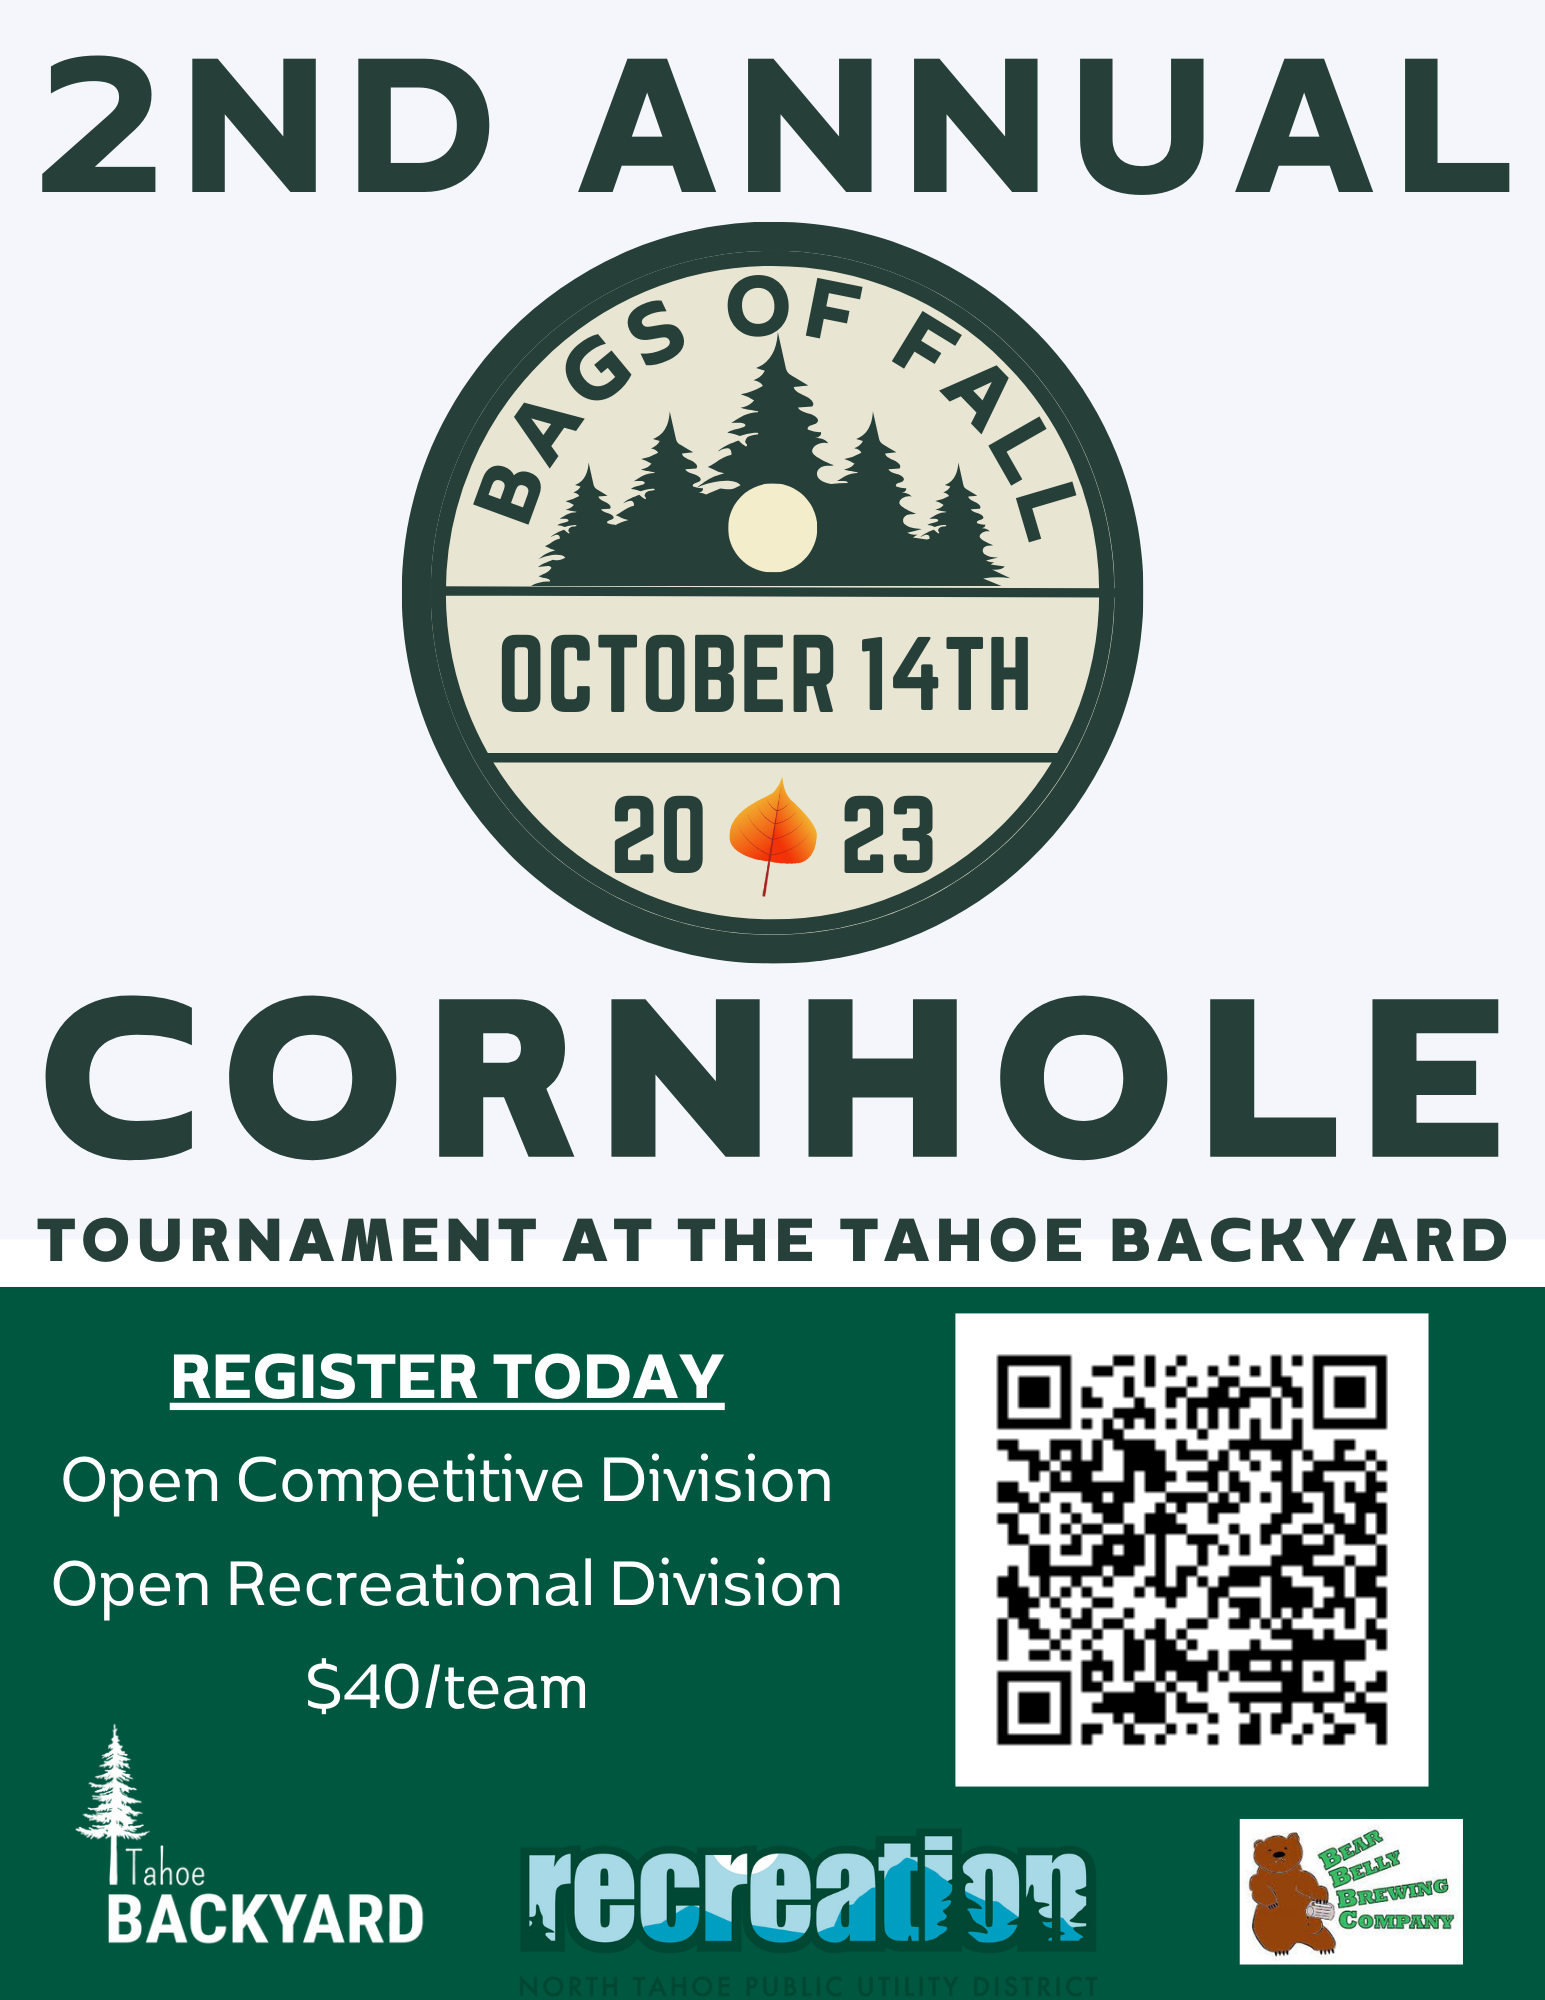 bags of fall tournament